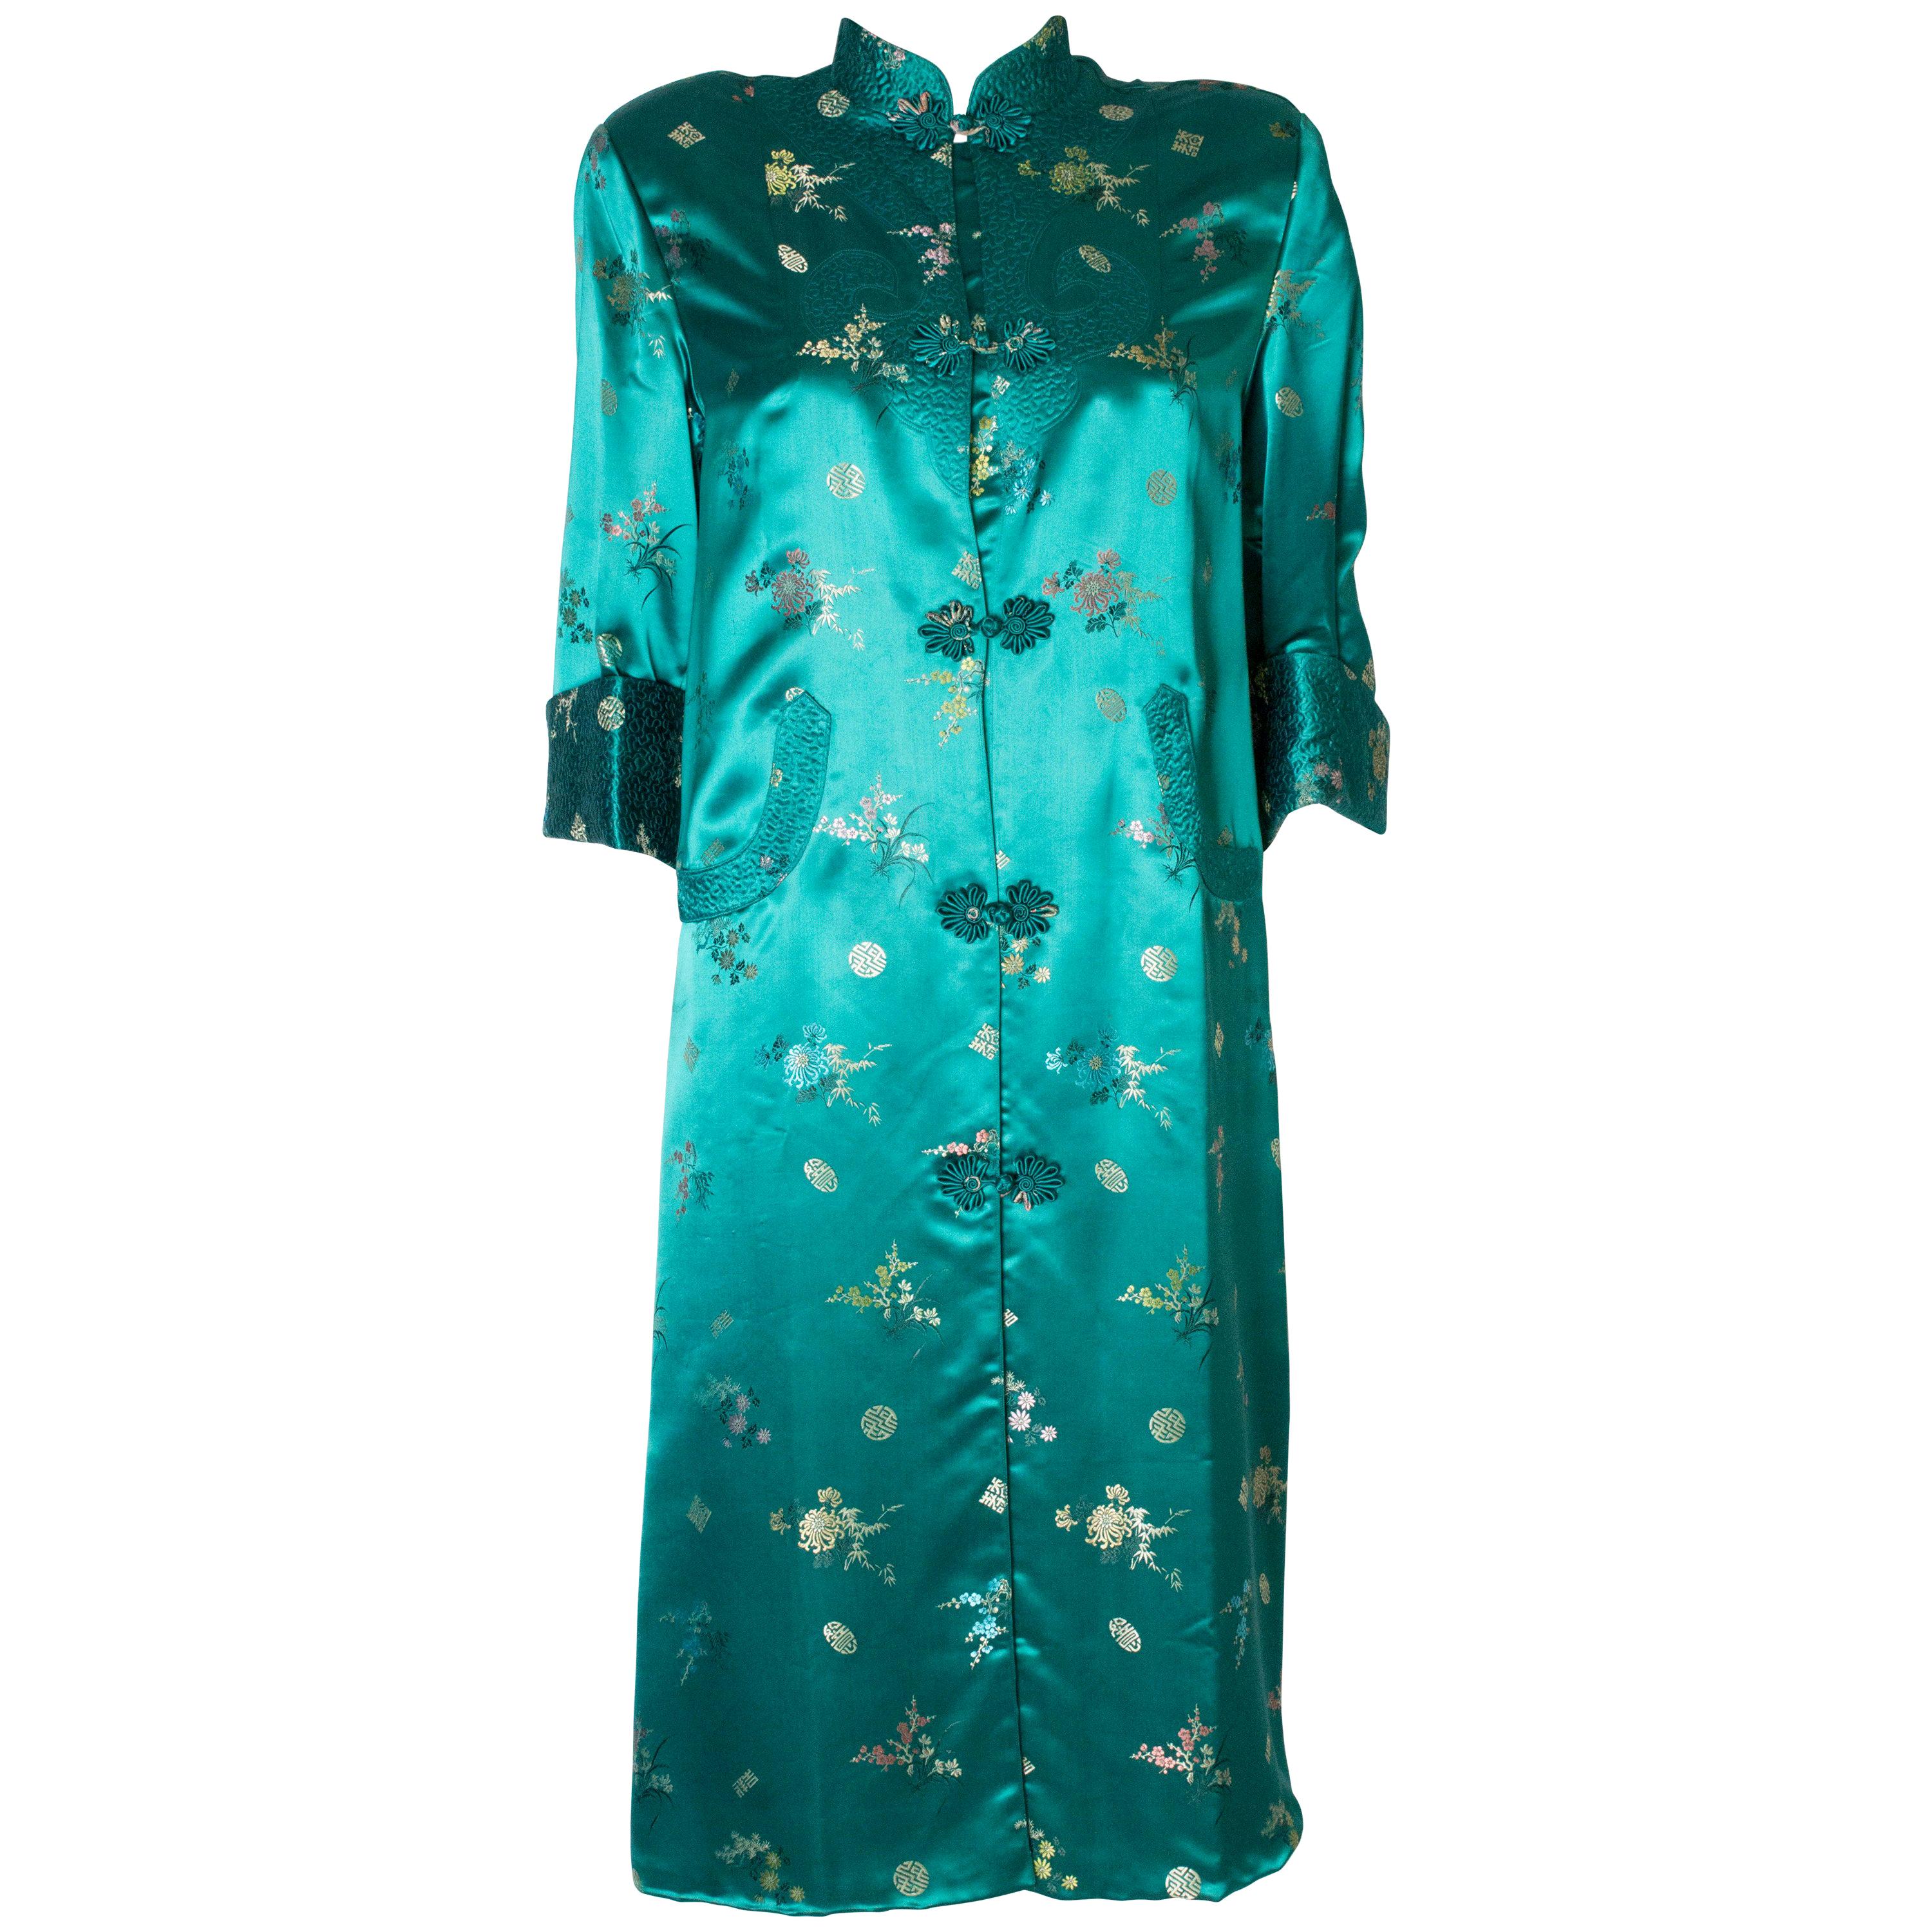 A Vintage 1970s Turquoise Chinese Coat with Stand-up Collar & Decorative Pockets